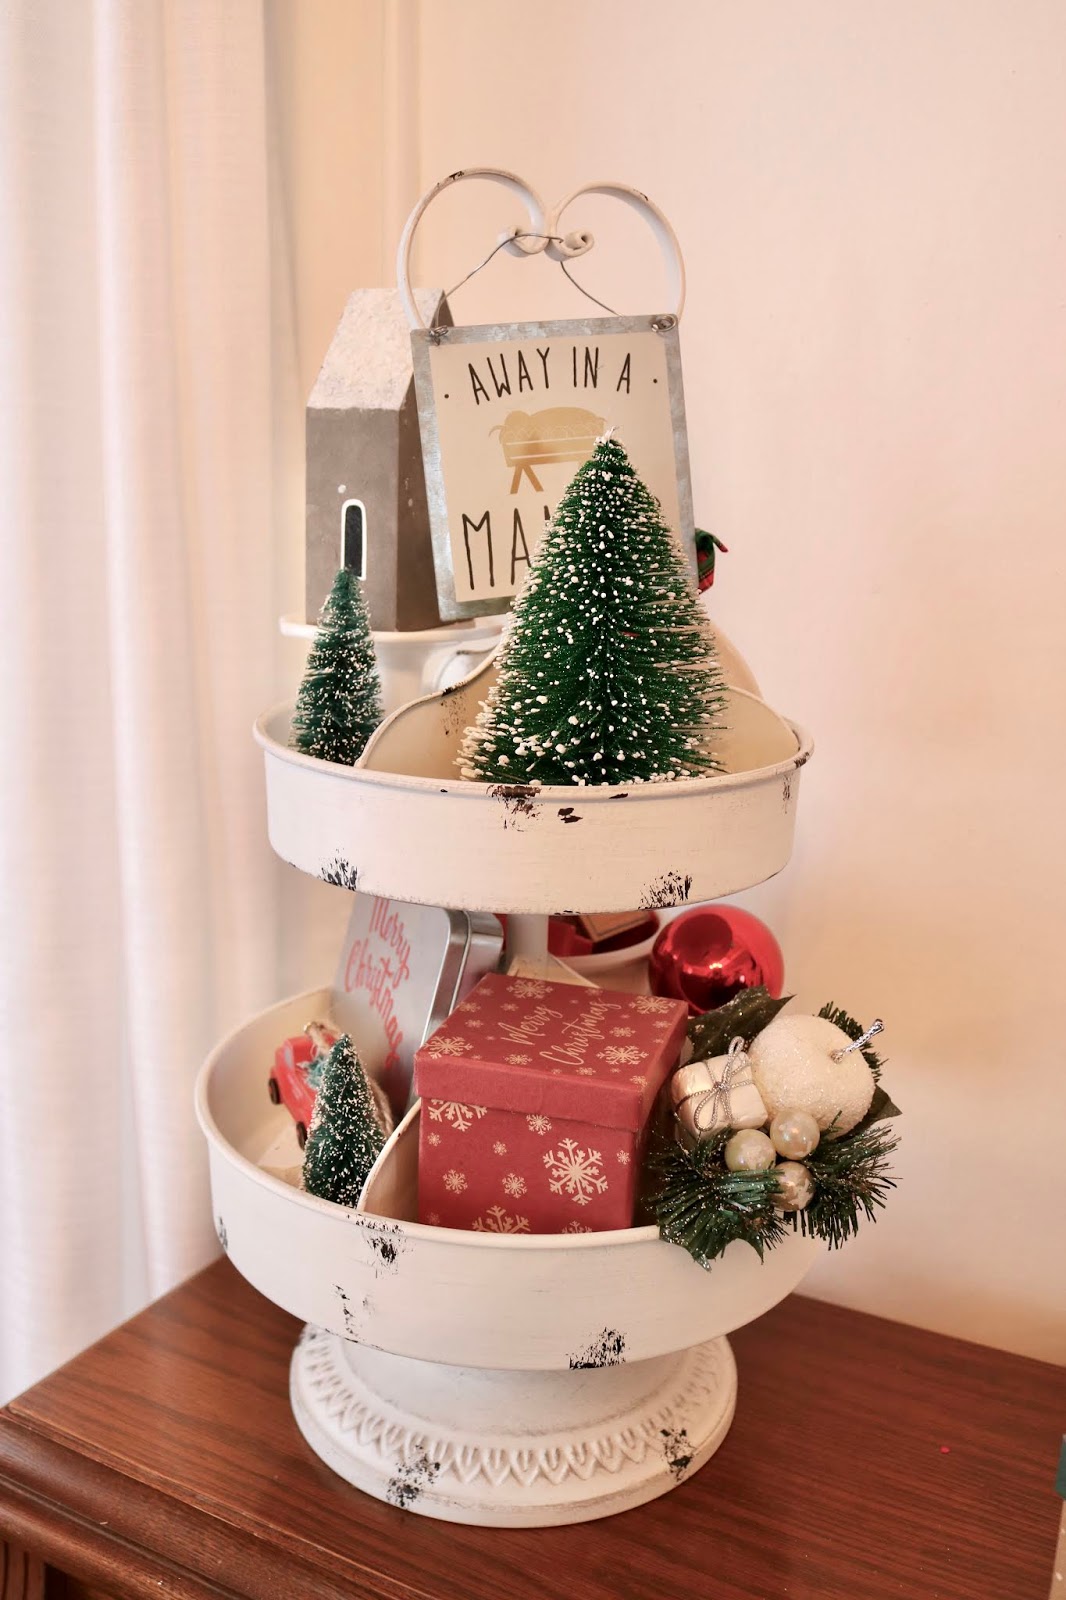 Amy S Creative Pursuits My Christmas Tiered Tray,Home Landscape Design In Nigeria